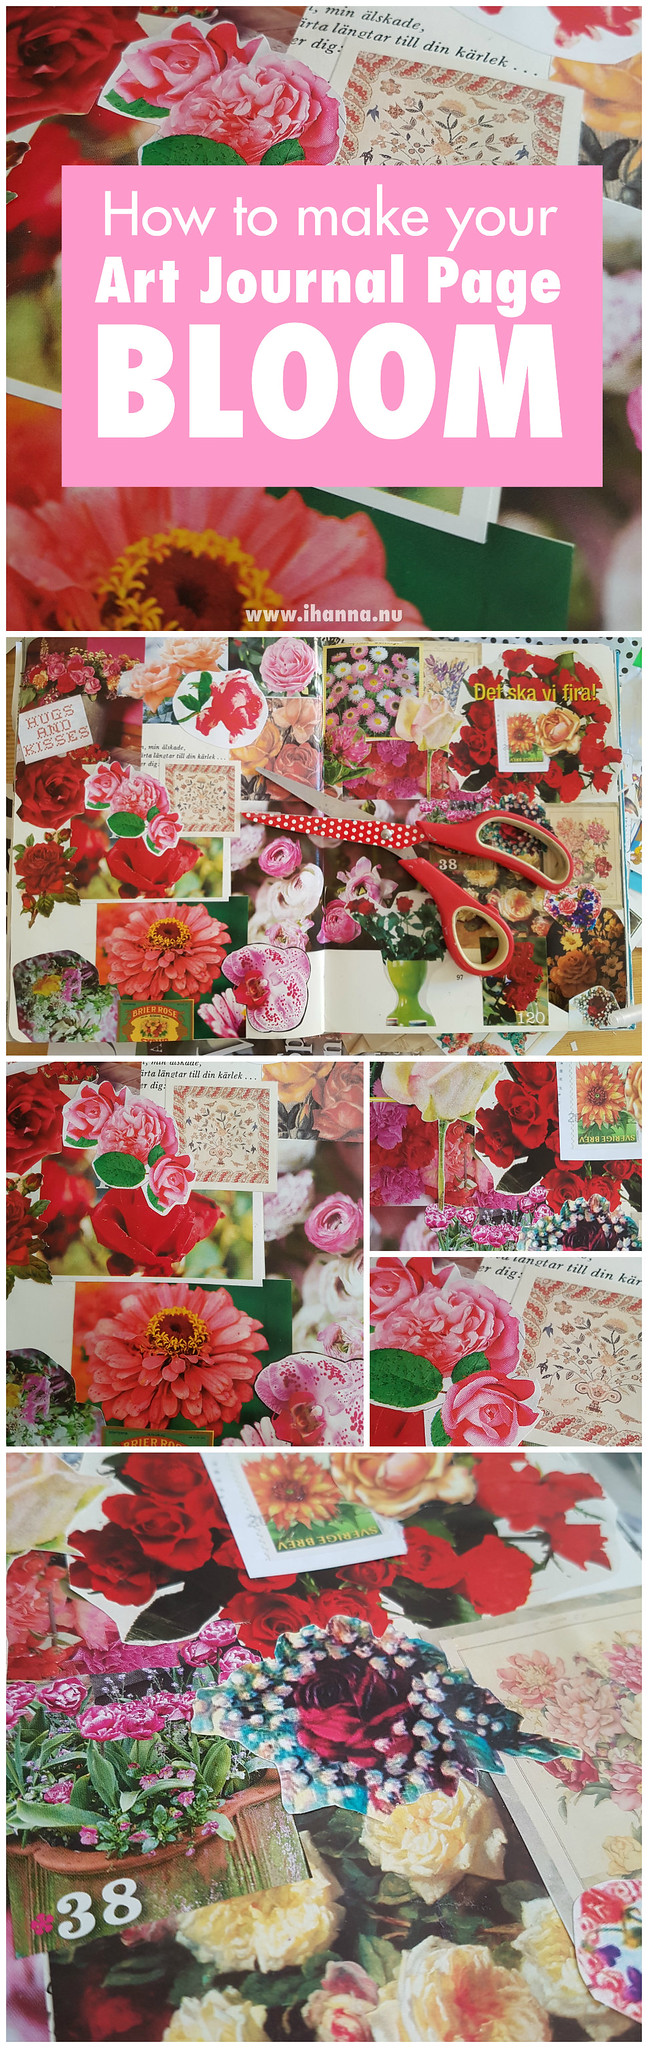 How to make your Art Journal Page Bloom - cut and paste tutorial by iHanna #artjournaling